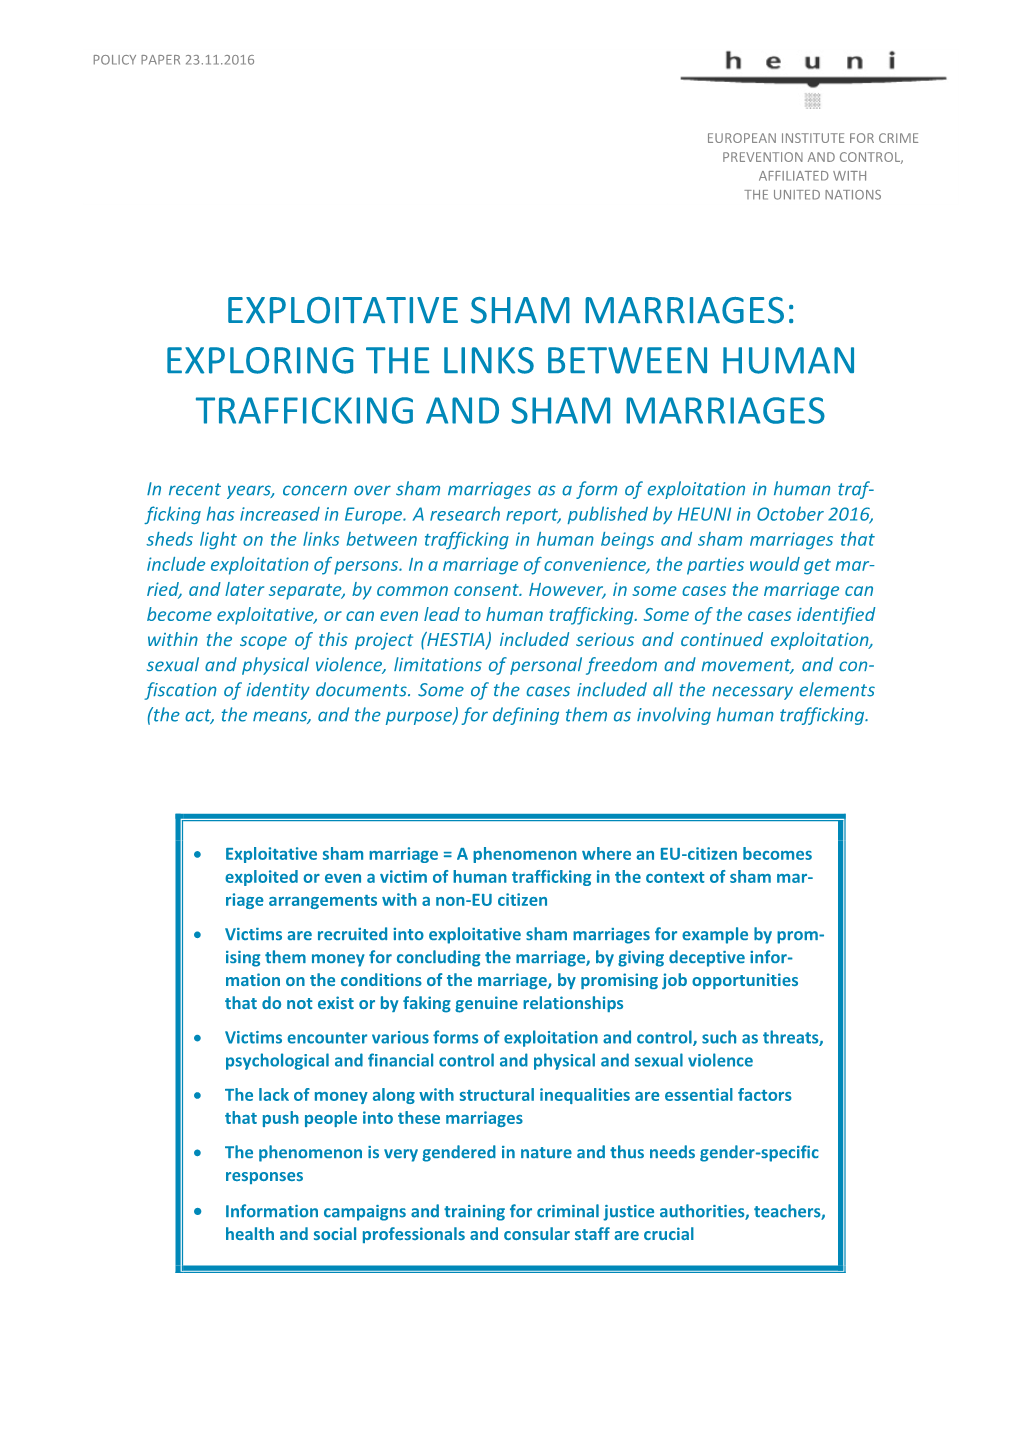 Exploring the Links Between Human Trafficking and Sham Marriages